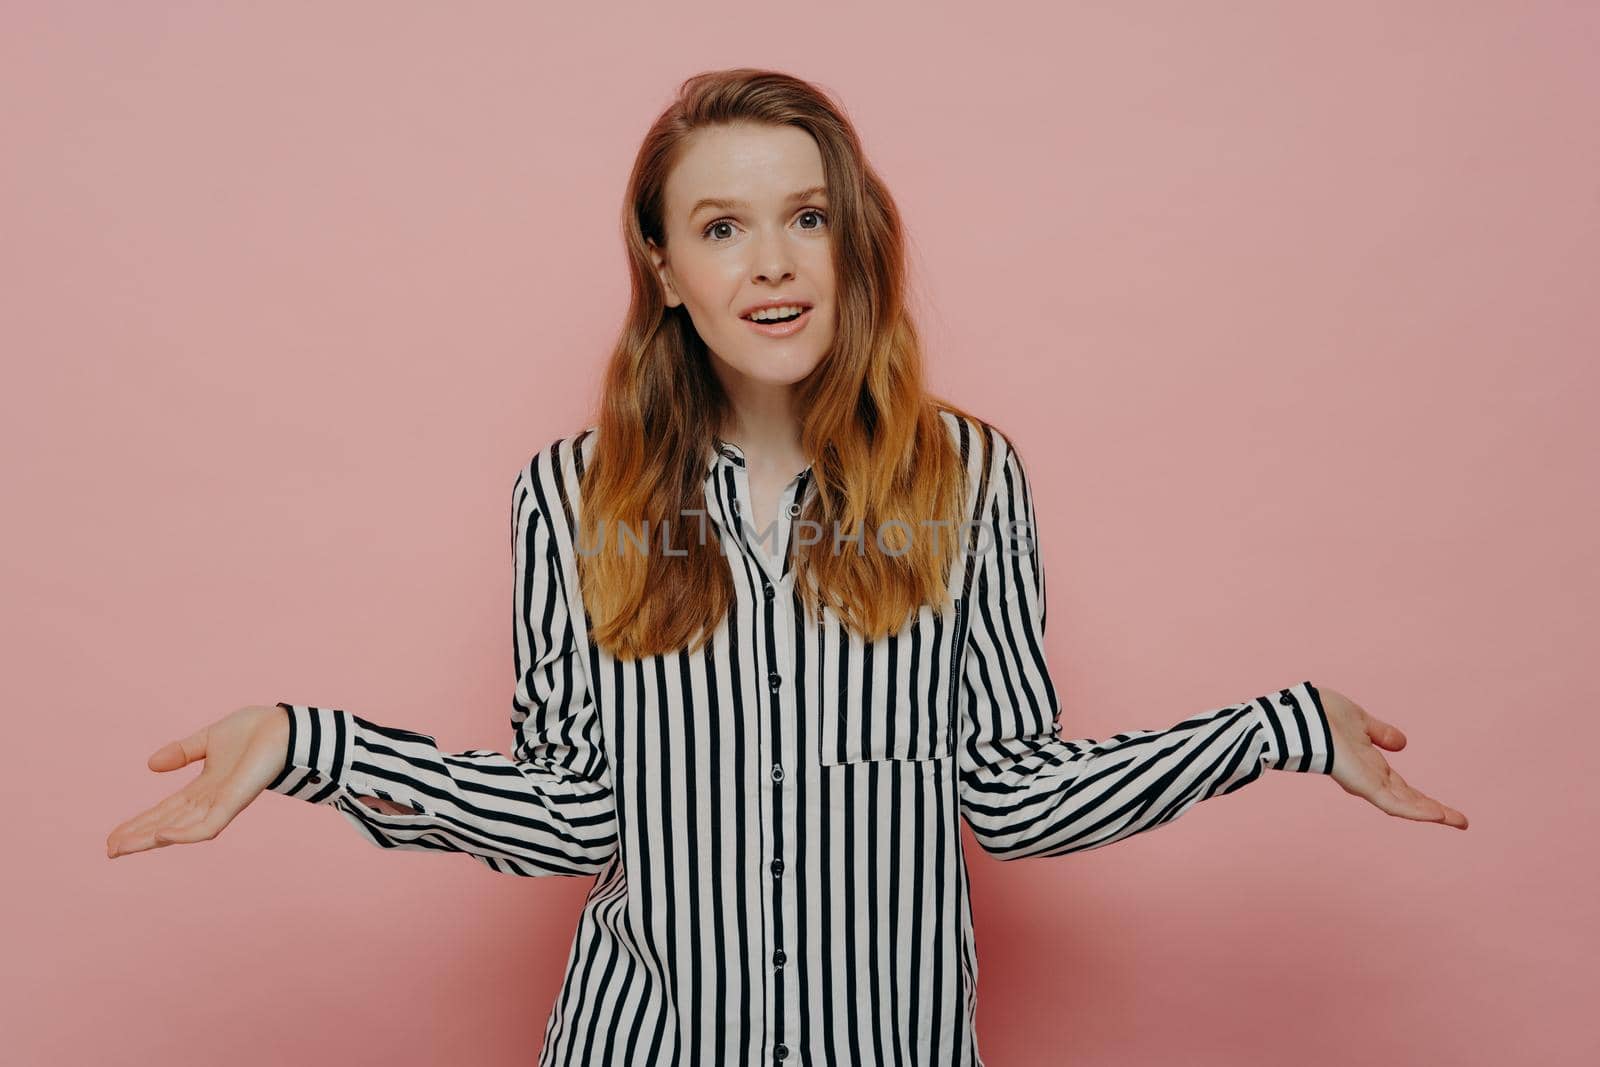 Young woman with long brunette hair wearing white shirt with black stripes cant make important decision or doesnt know how to help, shrugging it off, isolated in front of pink background